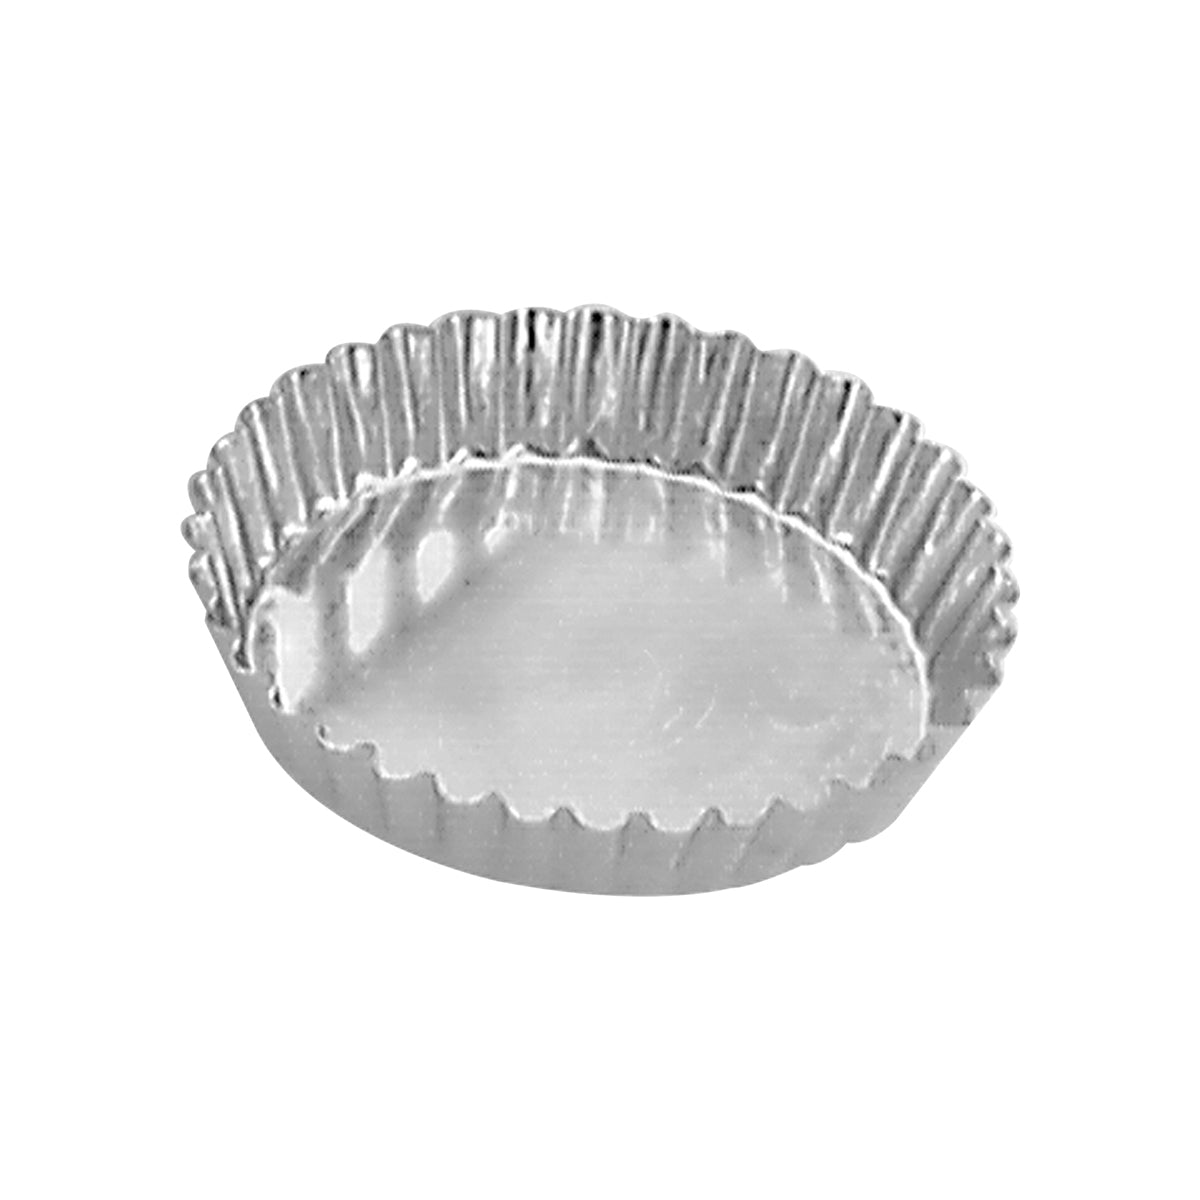 64085 Guery Tart Mould Round Fluted Fixed Base 85x16mm Tomkin Australia Hospitality Supplies